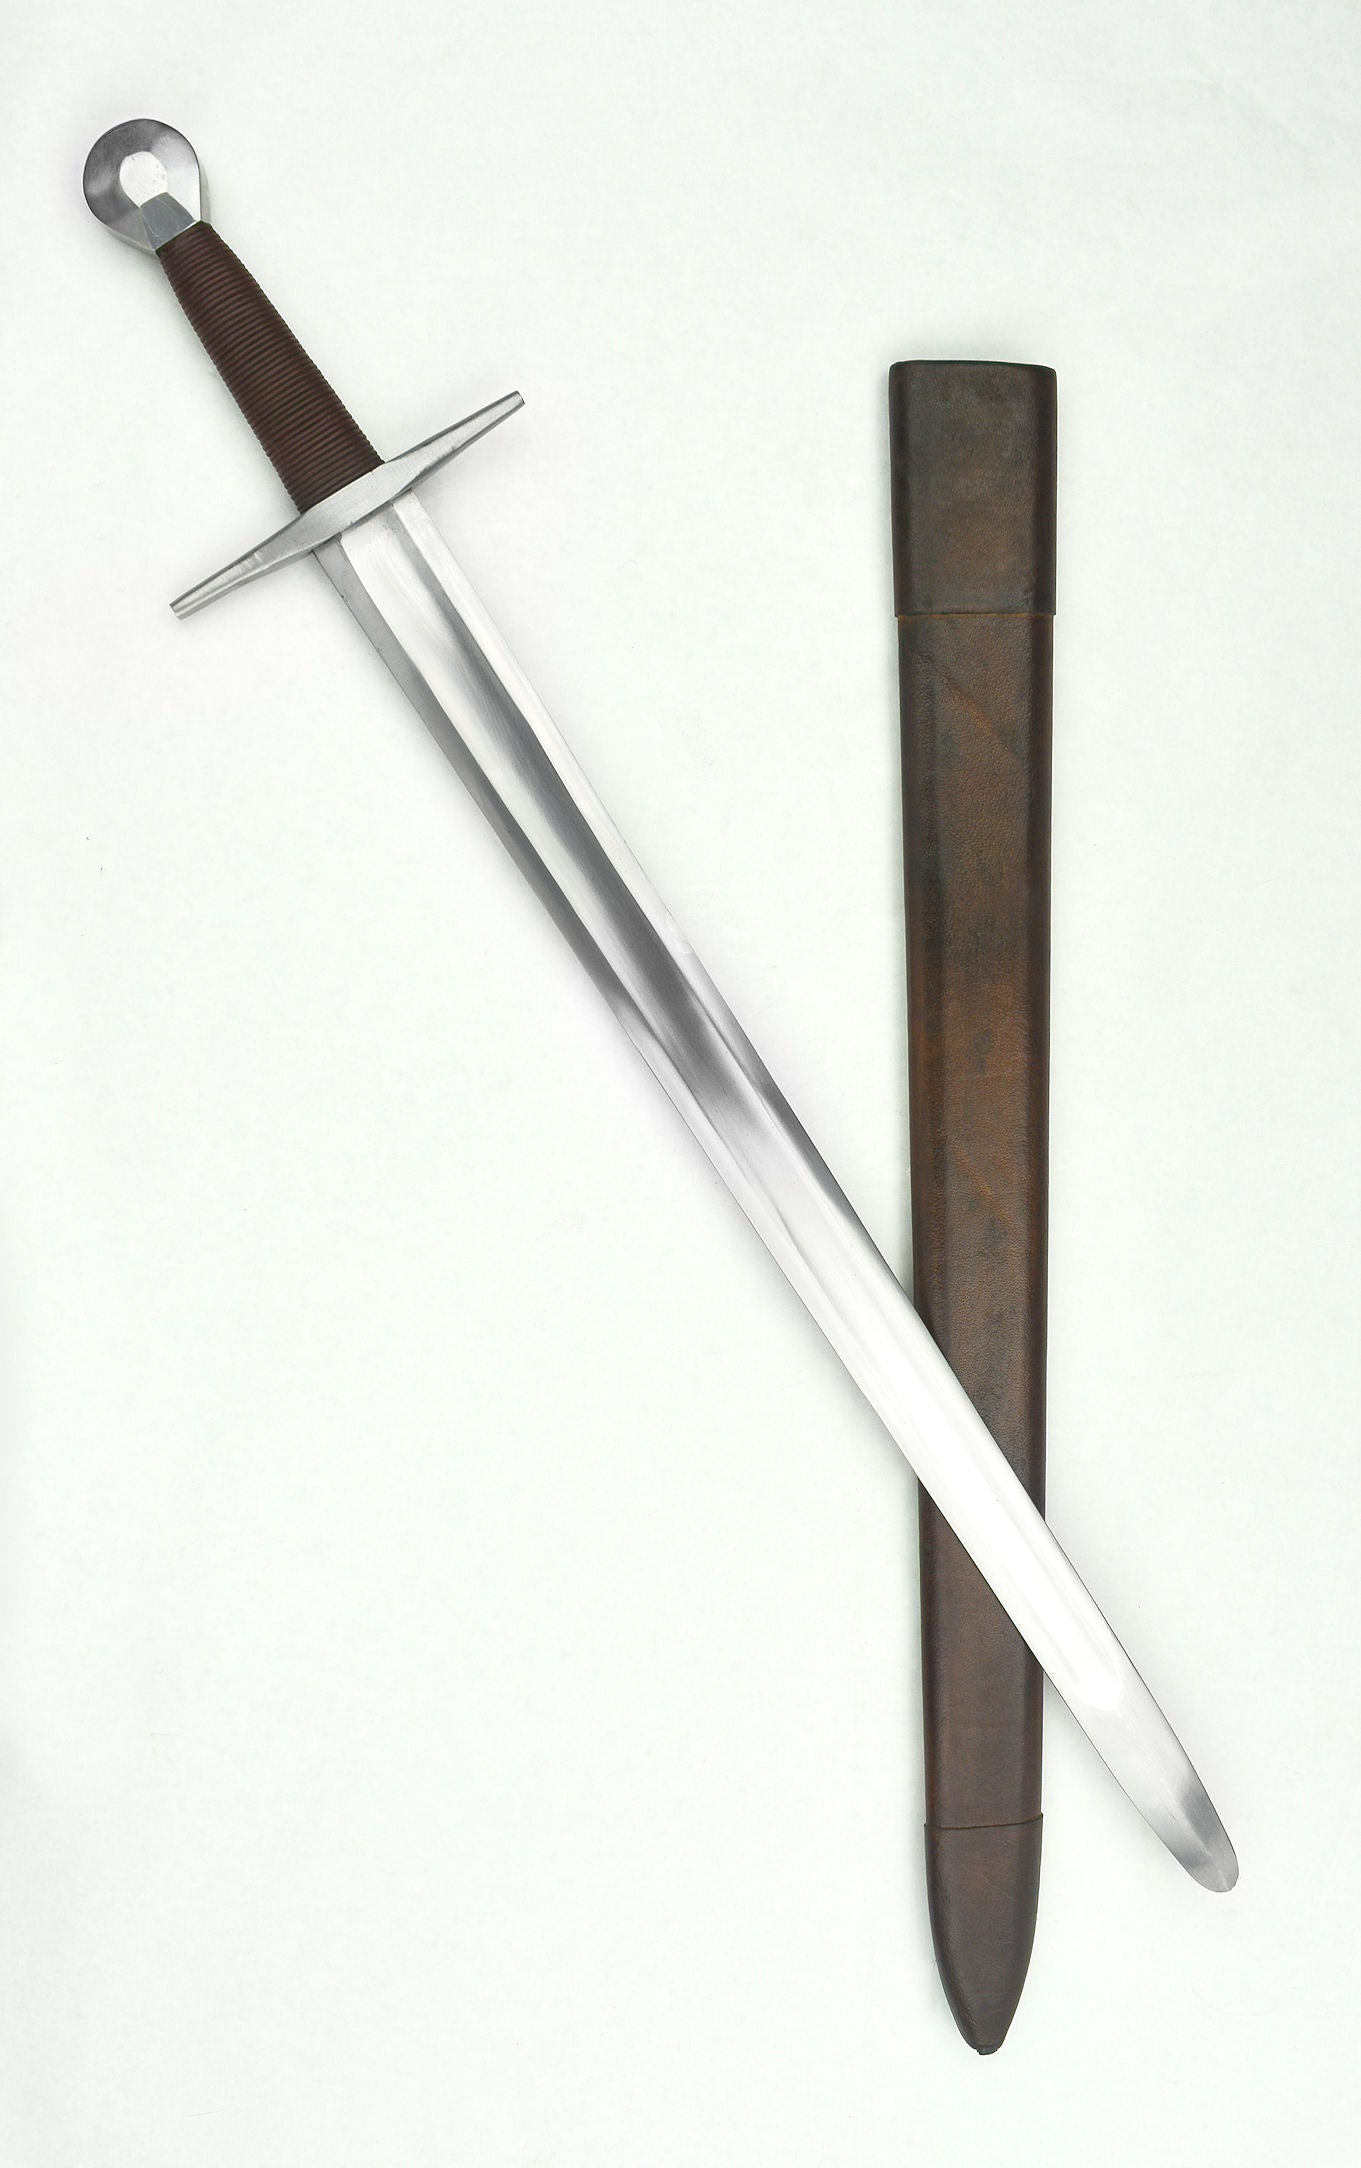 11th century viking sword with leather sheath and leather grip